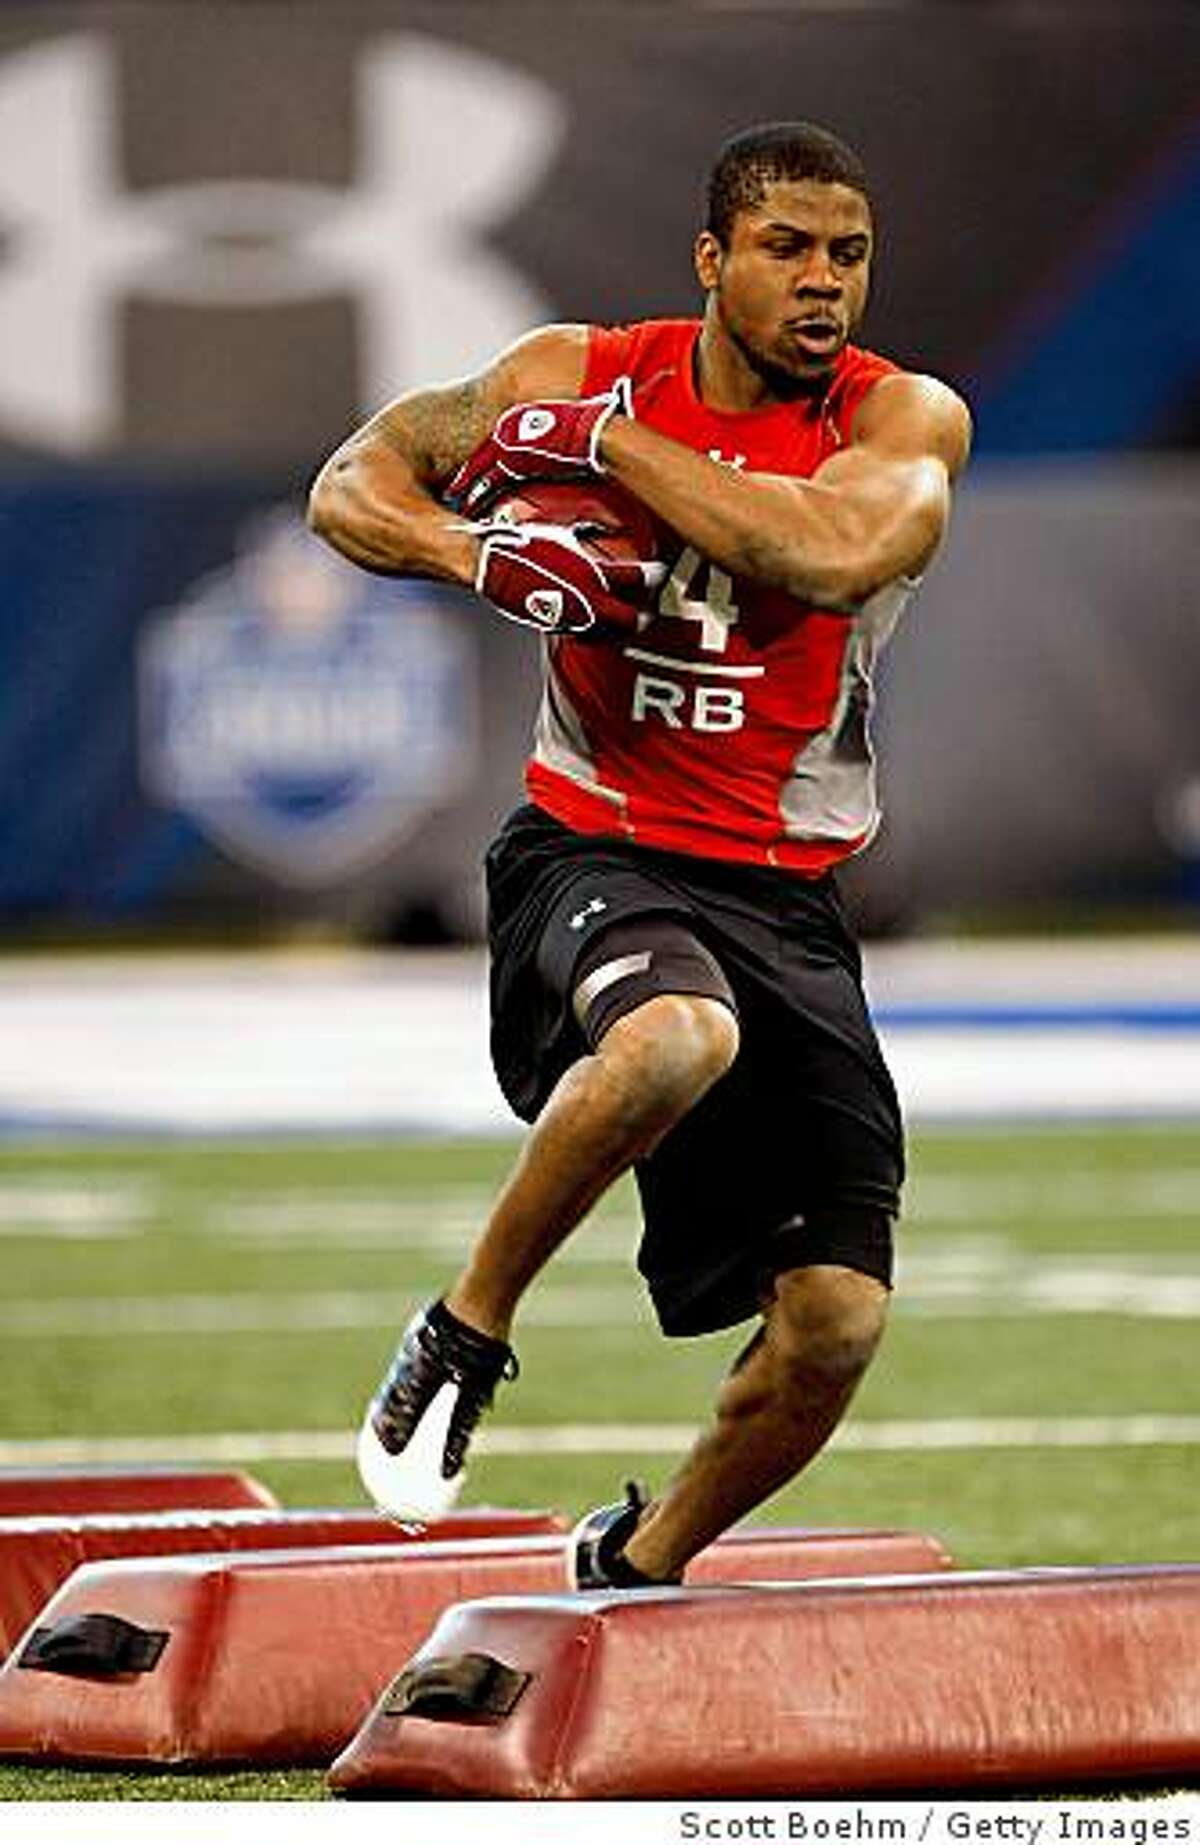 INDIANAPOLIS, IN - FEBRUARY 22: Running back Glen Coffee of Alabama runs with the football during the NFL Scouting Combine presented by Under Armour at Lucas Oil Stadium on February 22, 2009 in Indianapolis, Indiana. (Photo by Scott Boehm/Getty Images)